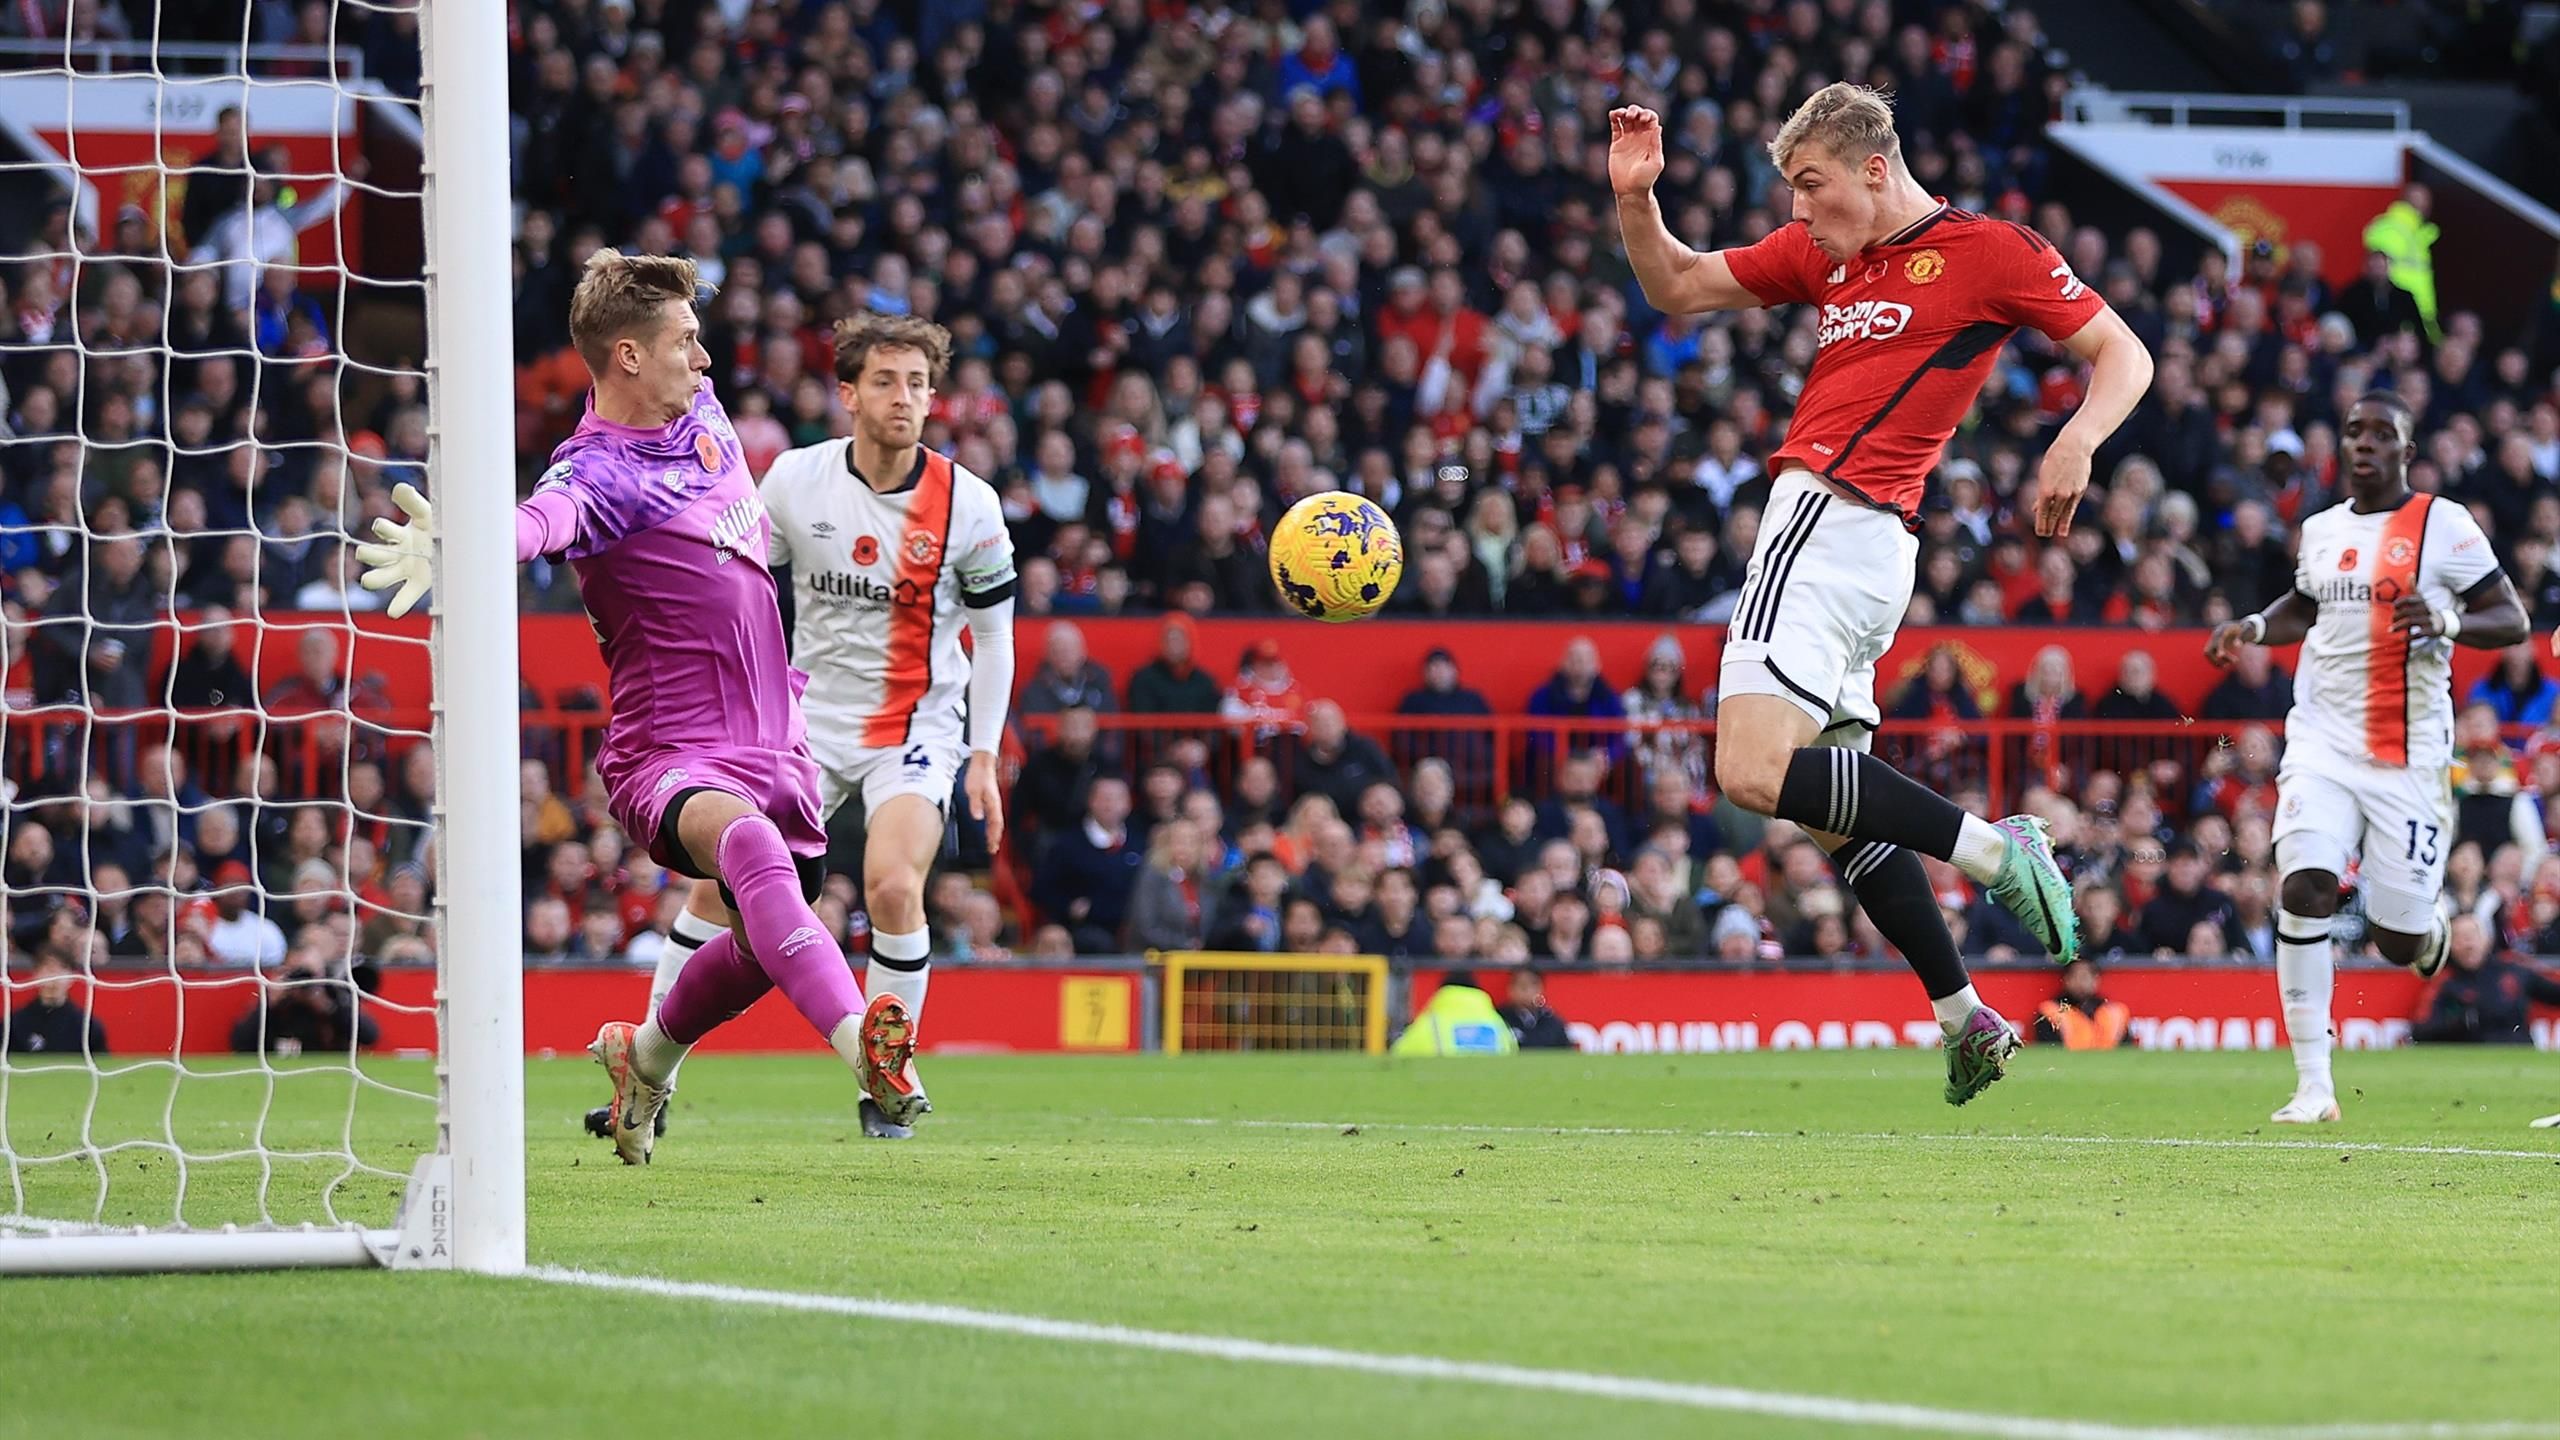 Manchester United fails to score in the English Premier League: Rio Ferdinand misses Harry Kane